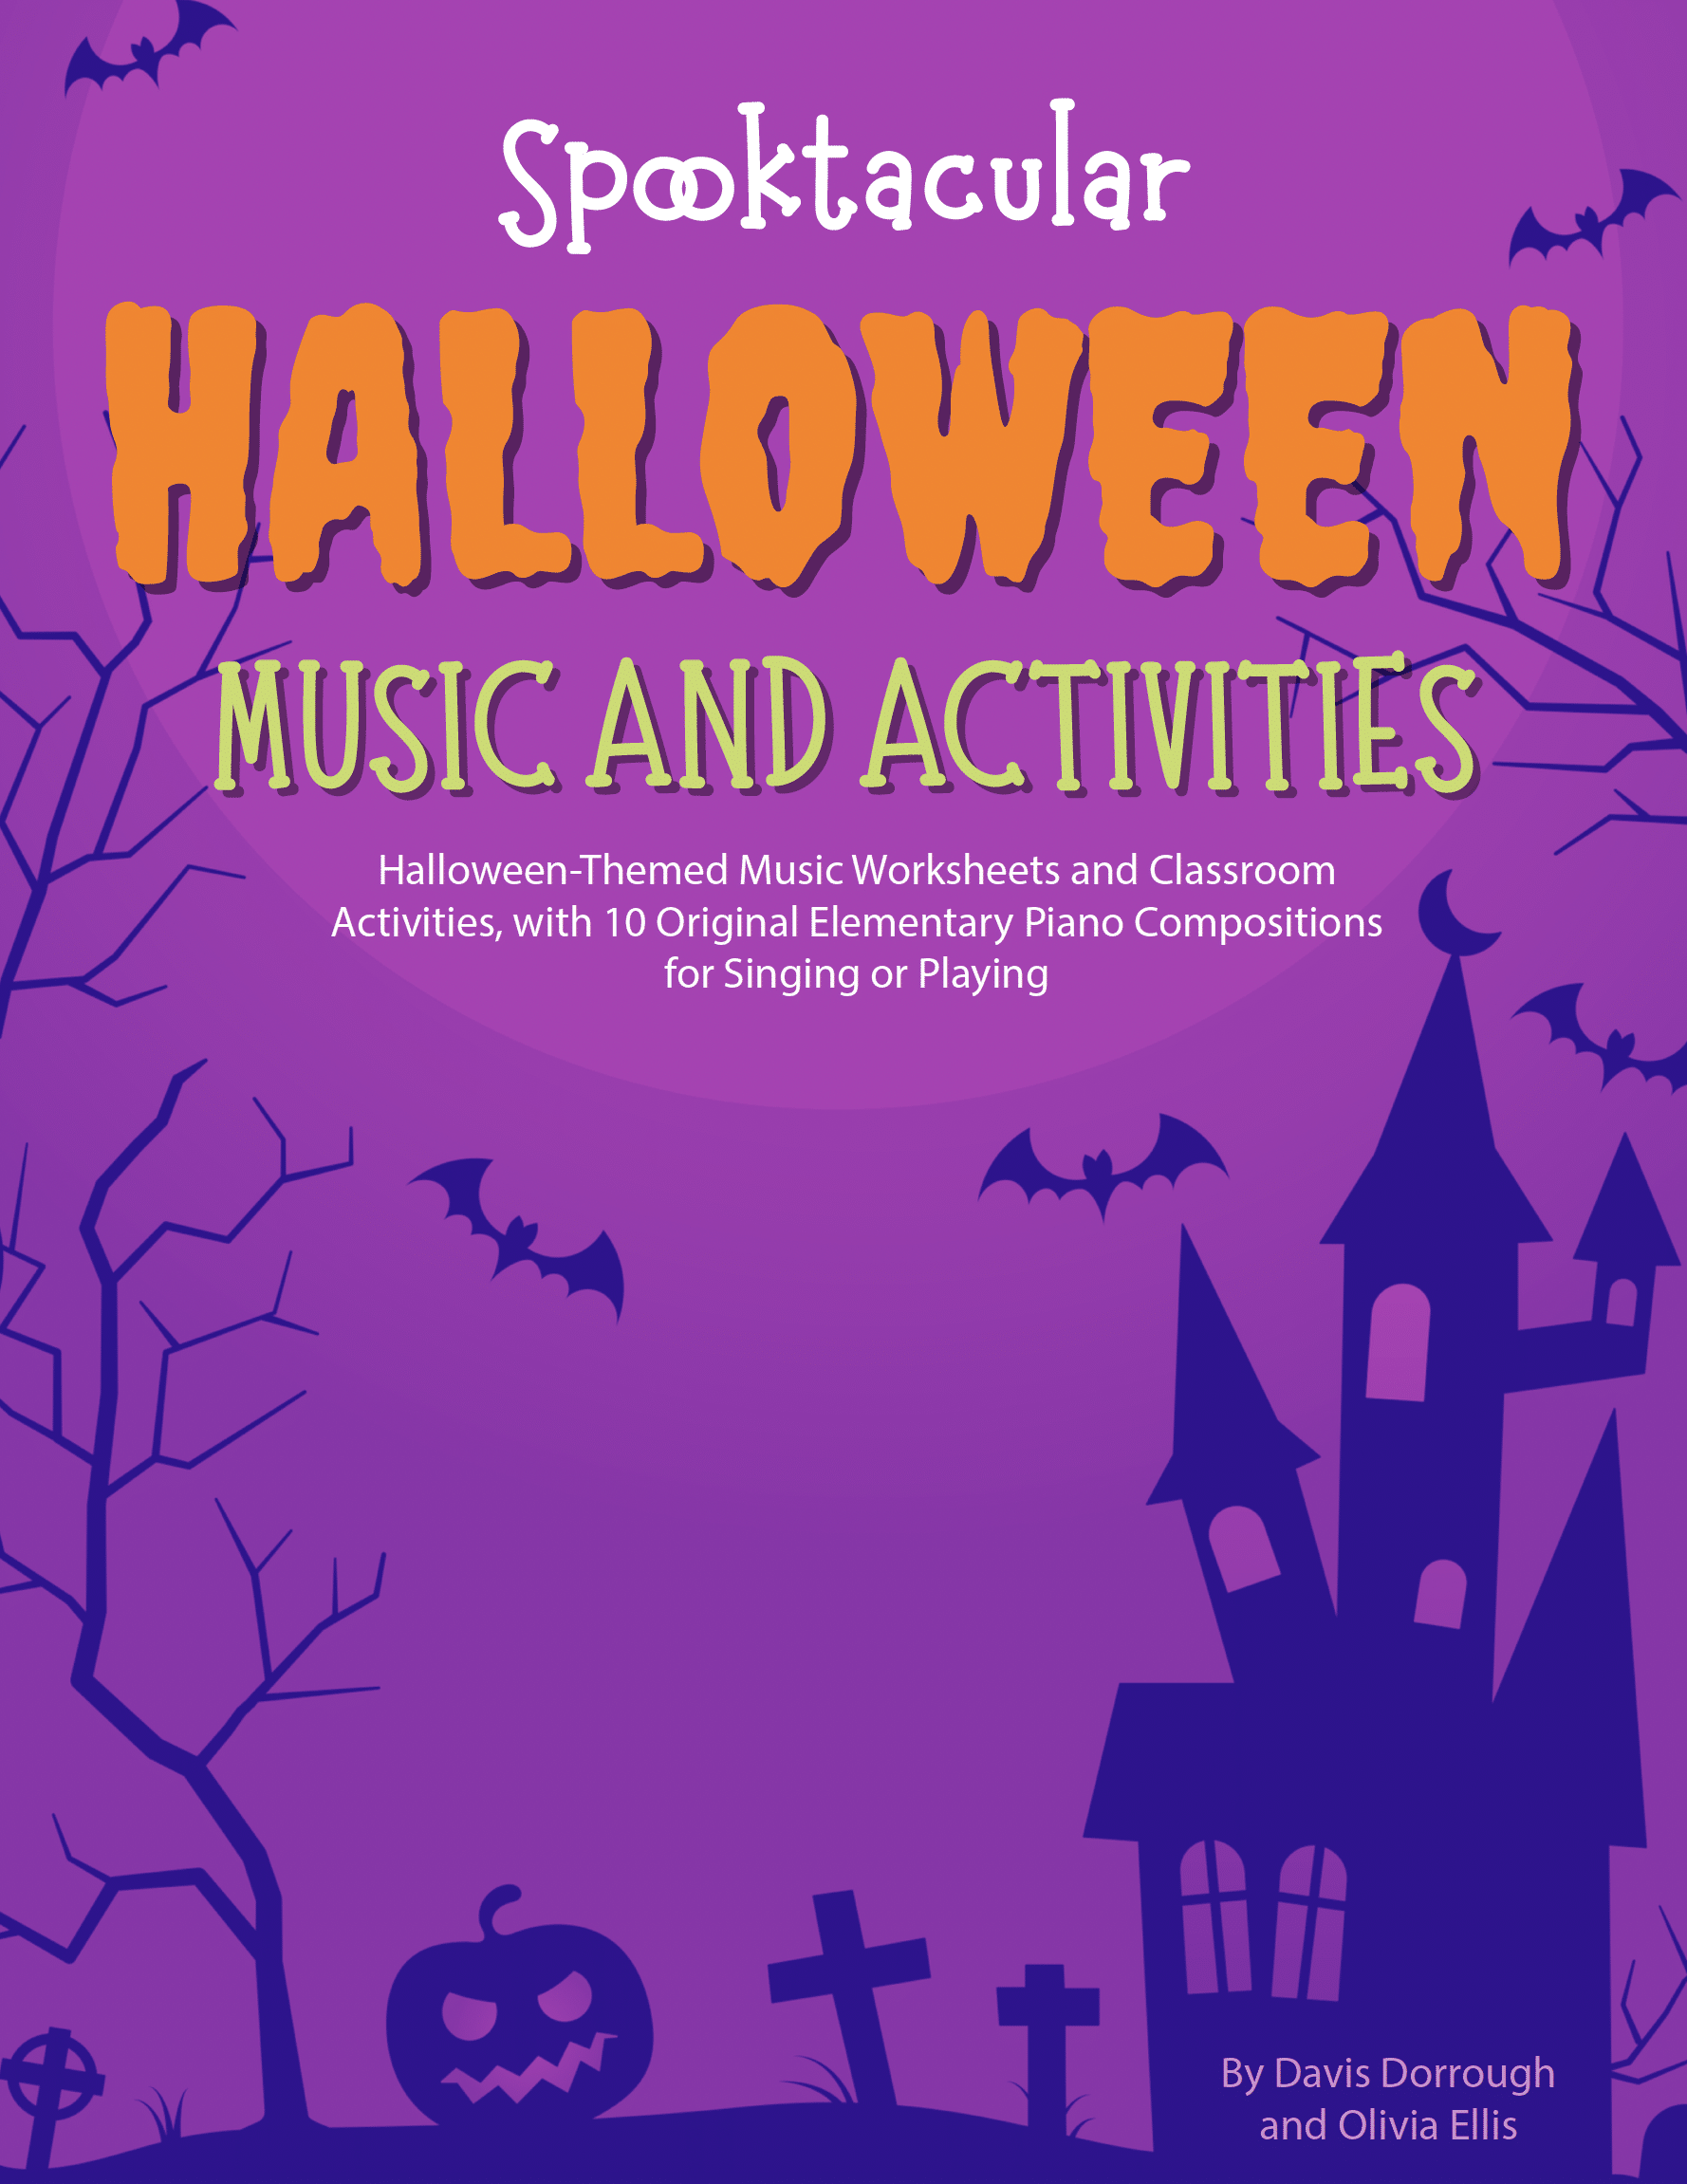 Spooktacular Halloween Music and Activities Book Cover